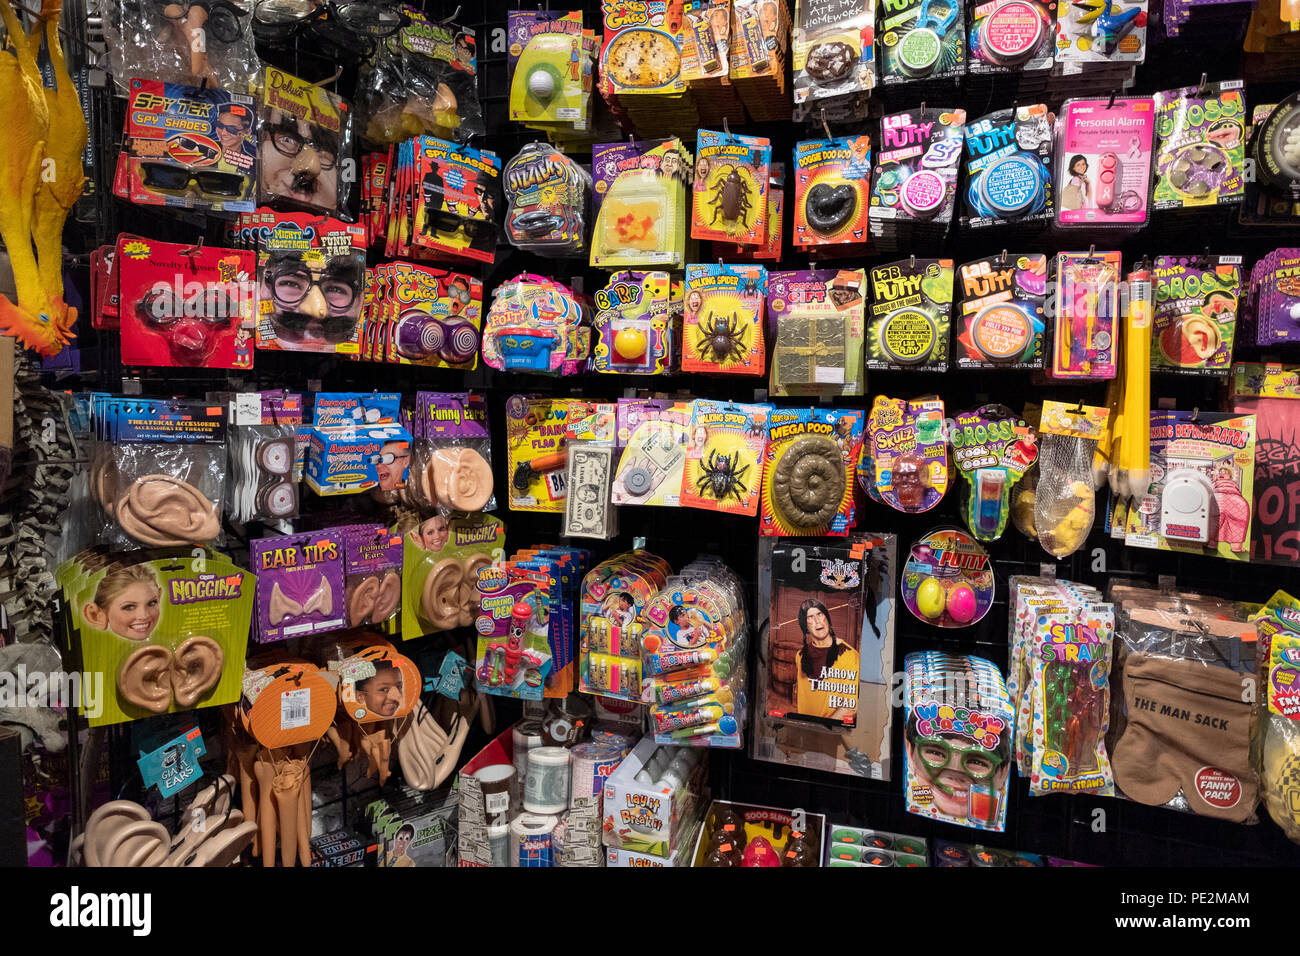 A collection of gag gifts, disguises and children's toys for sale at The Halloween Adventure in Greenwich Village in Manhattan, New York City. Stock Photo